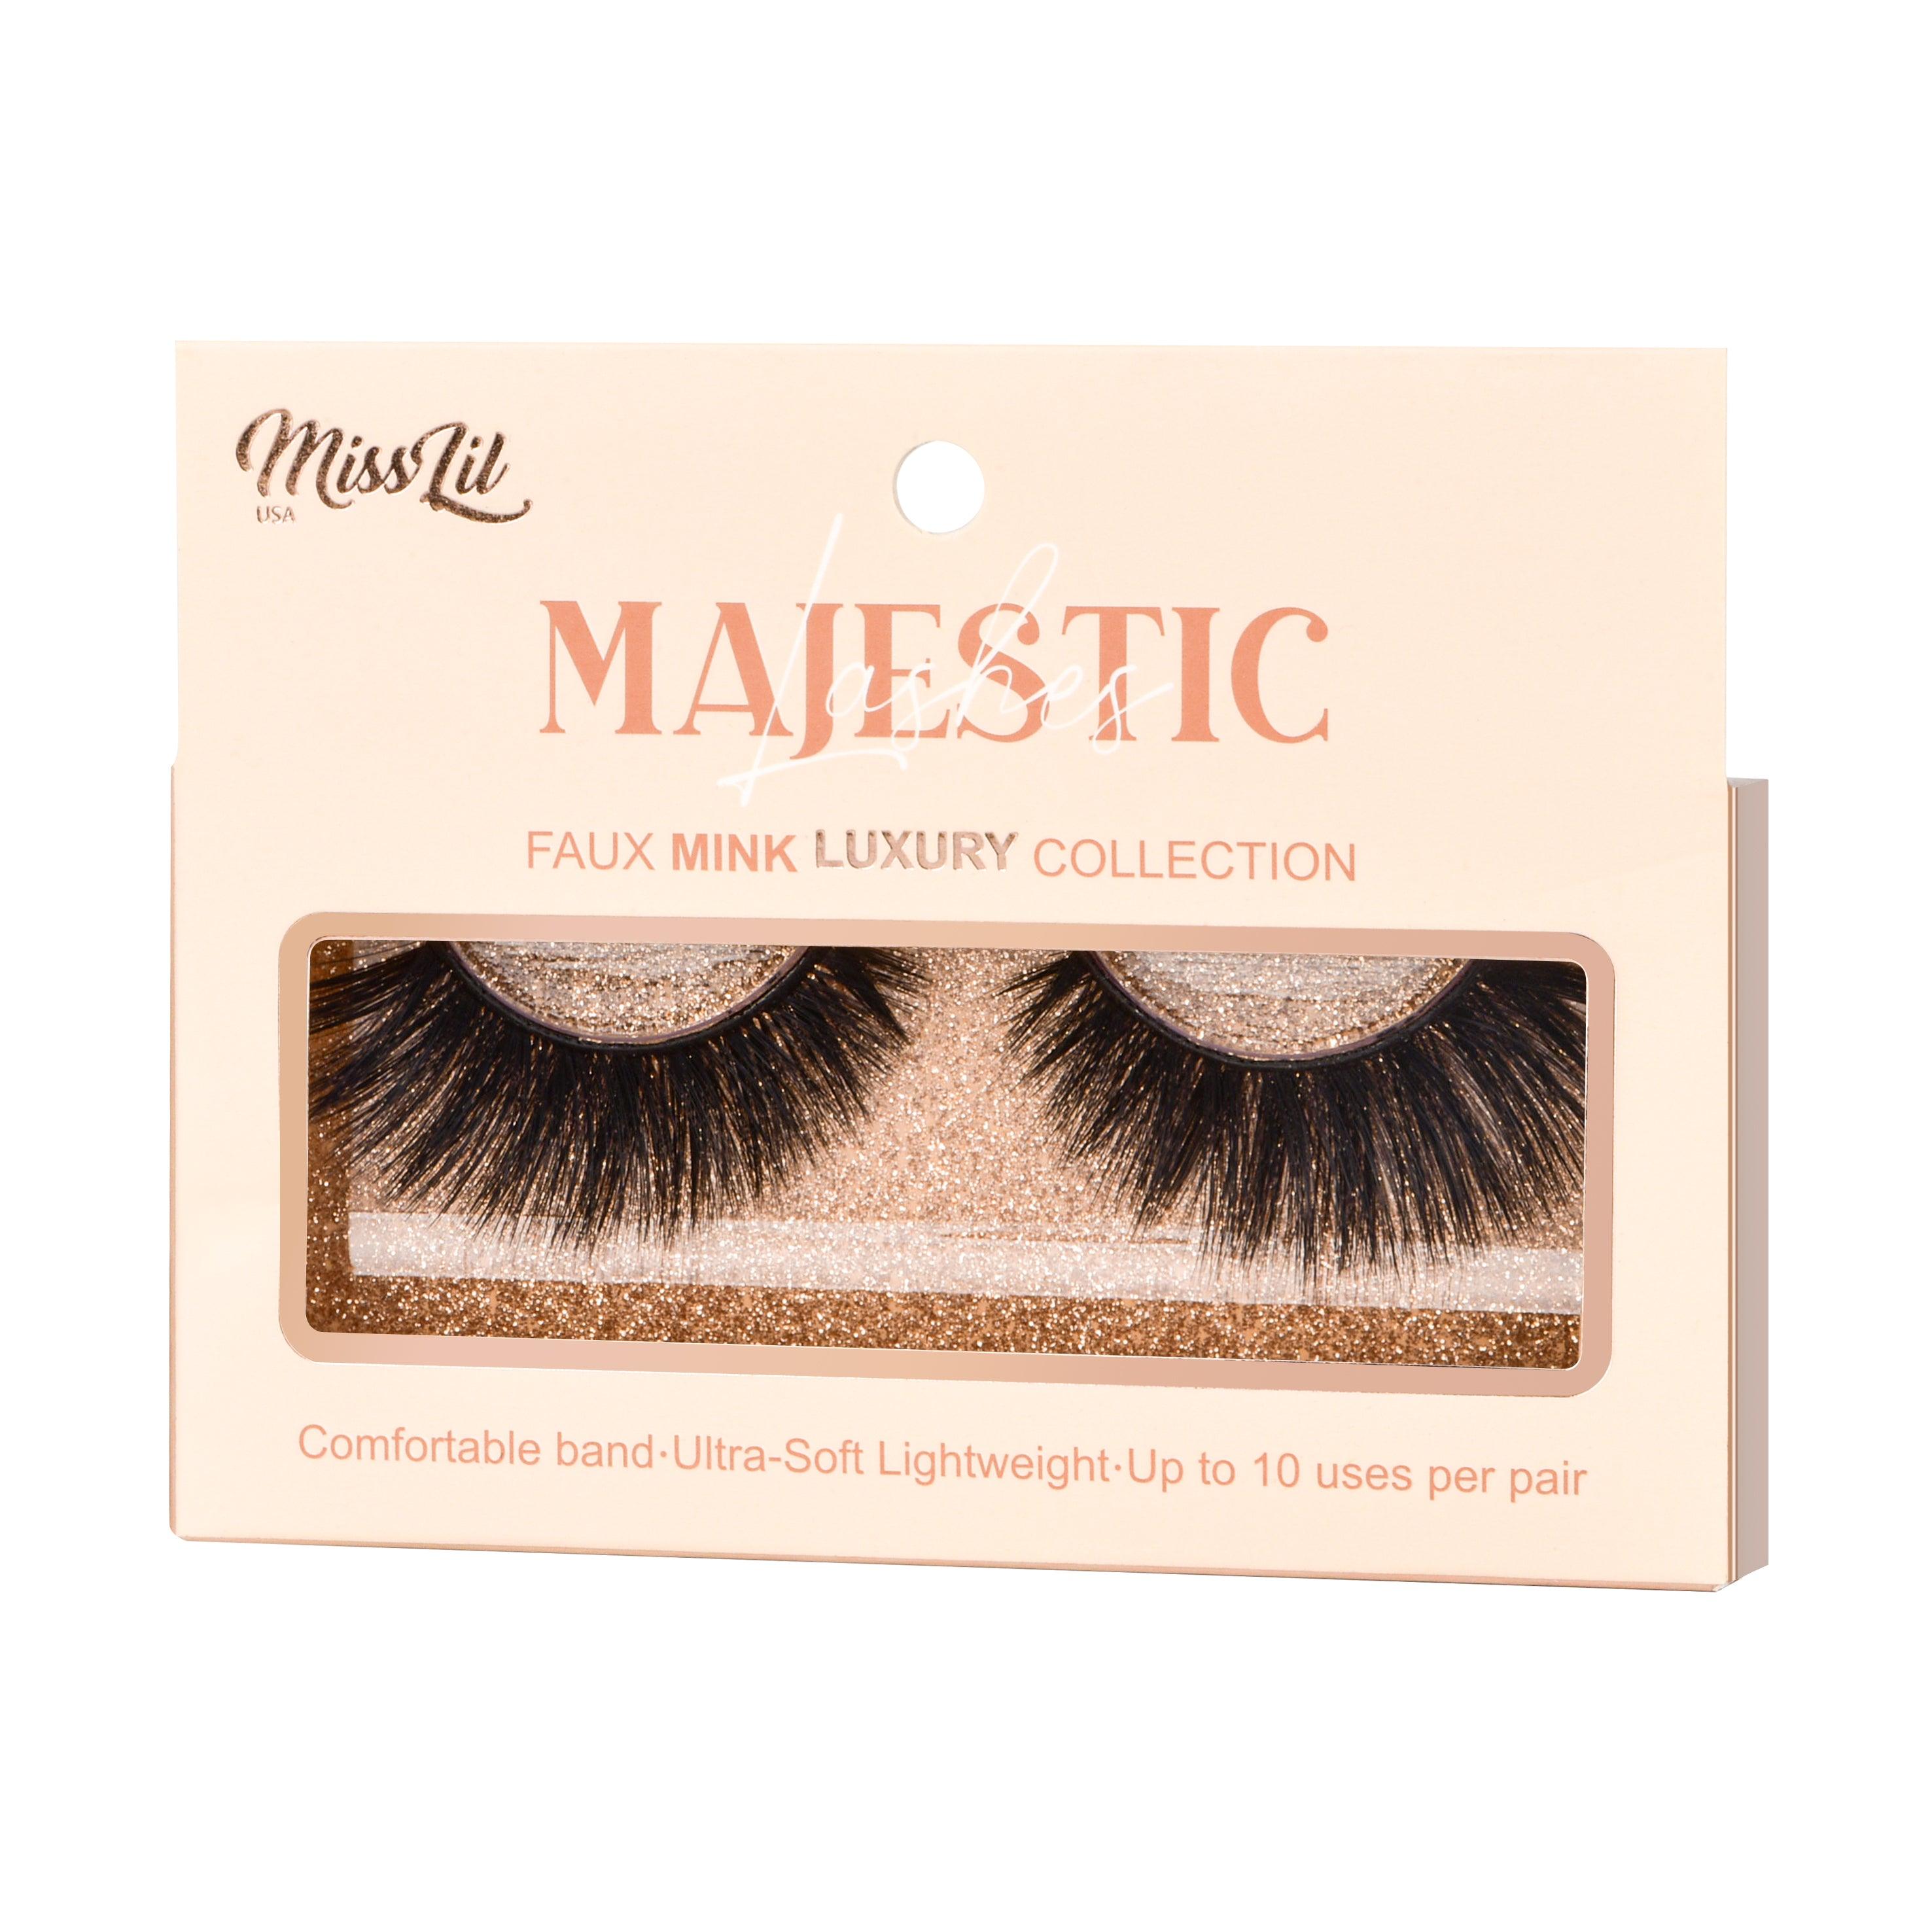 1 Pair Lashes-Majestic Collection #14 (Pack of 12) - Miss Lil USA Wholesale